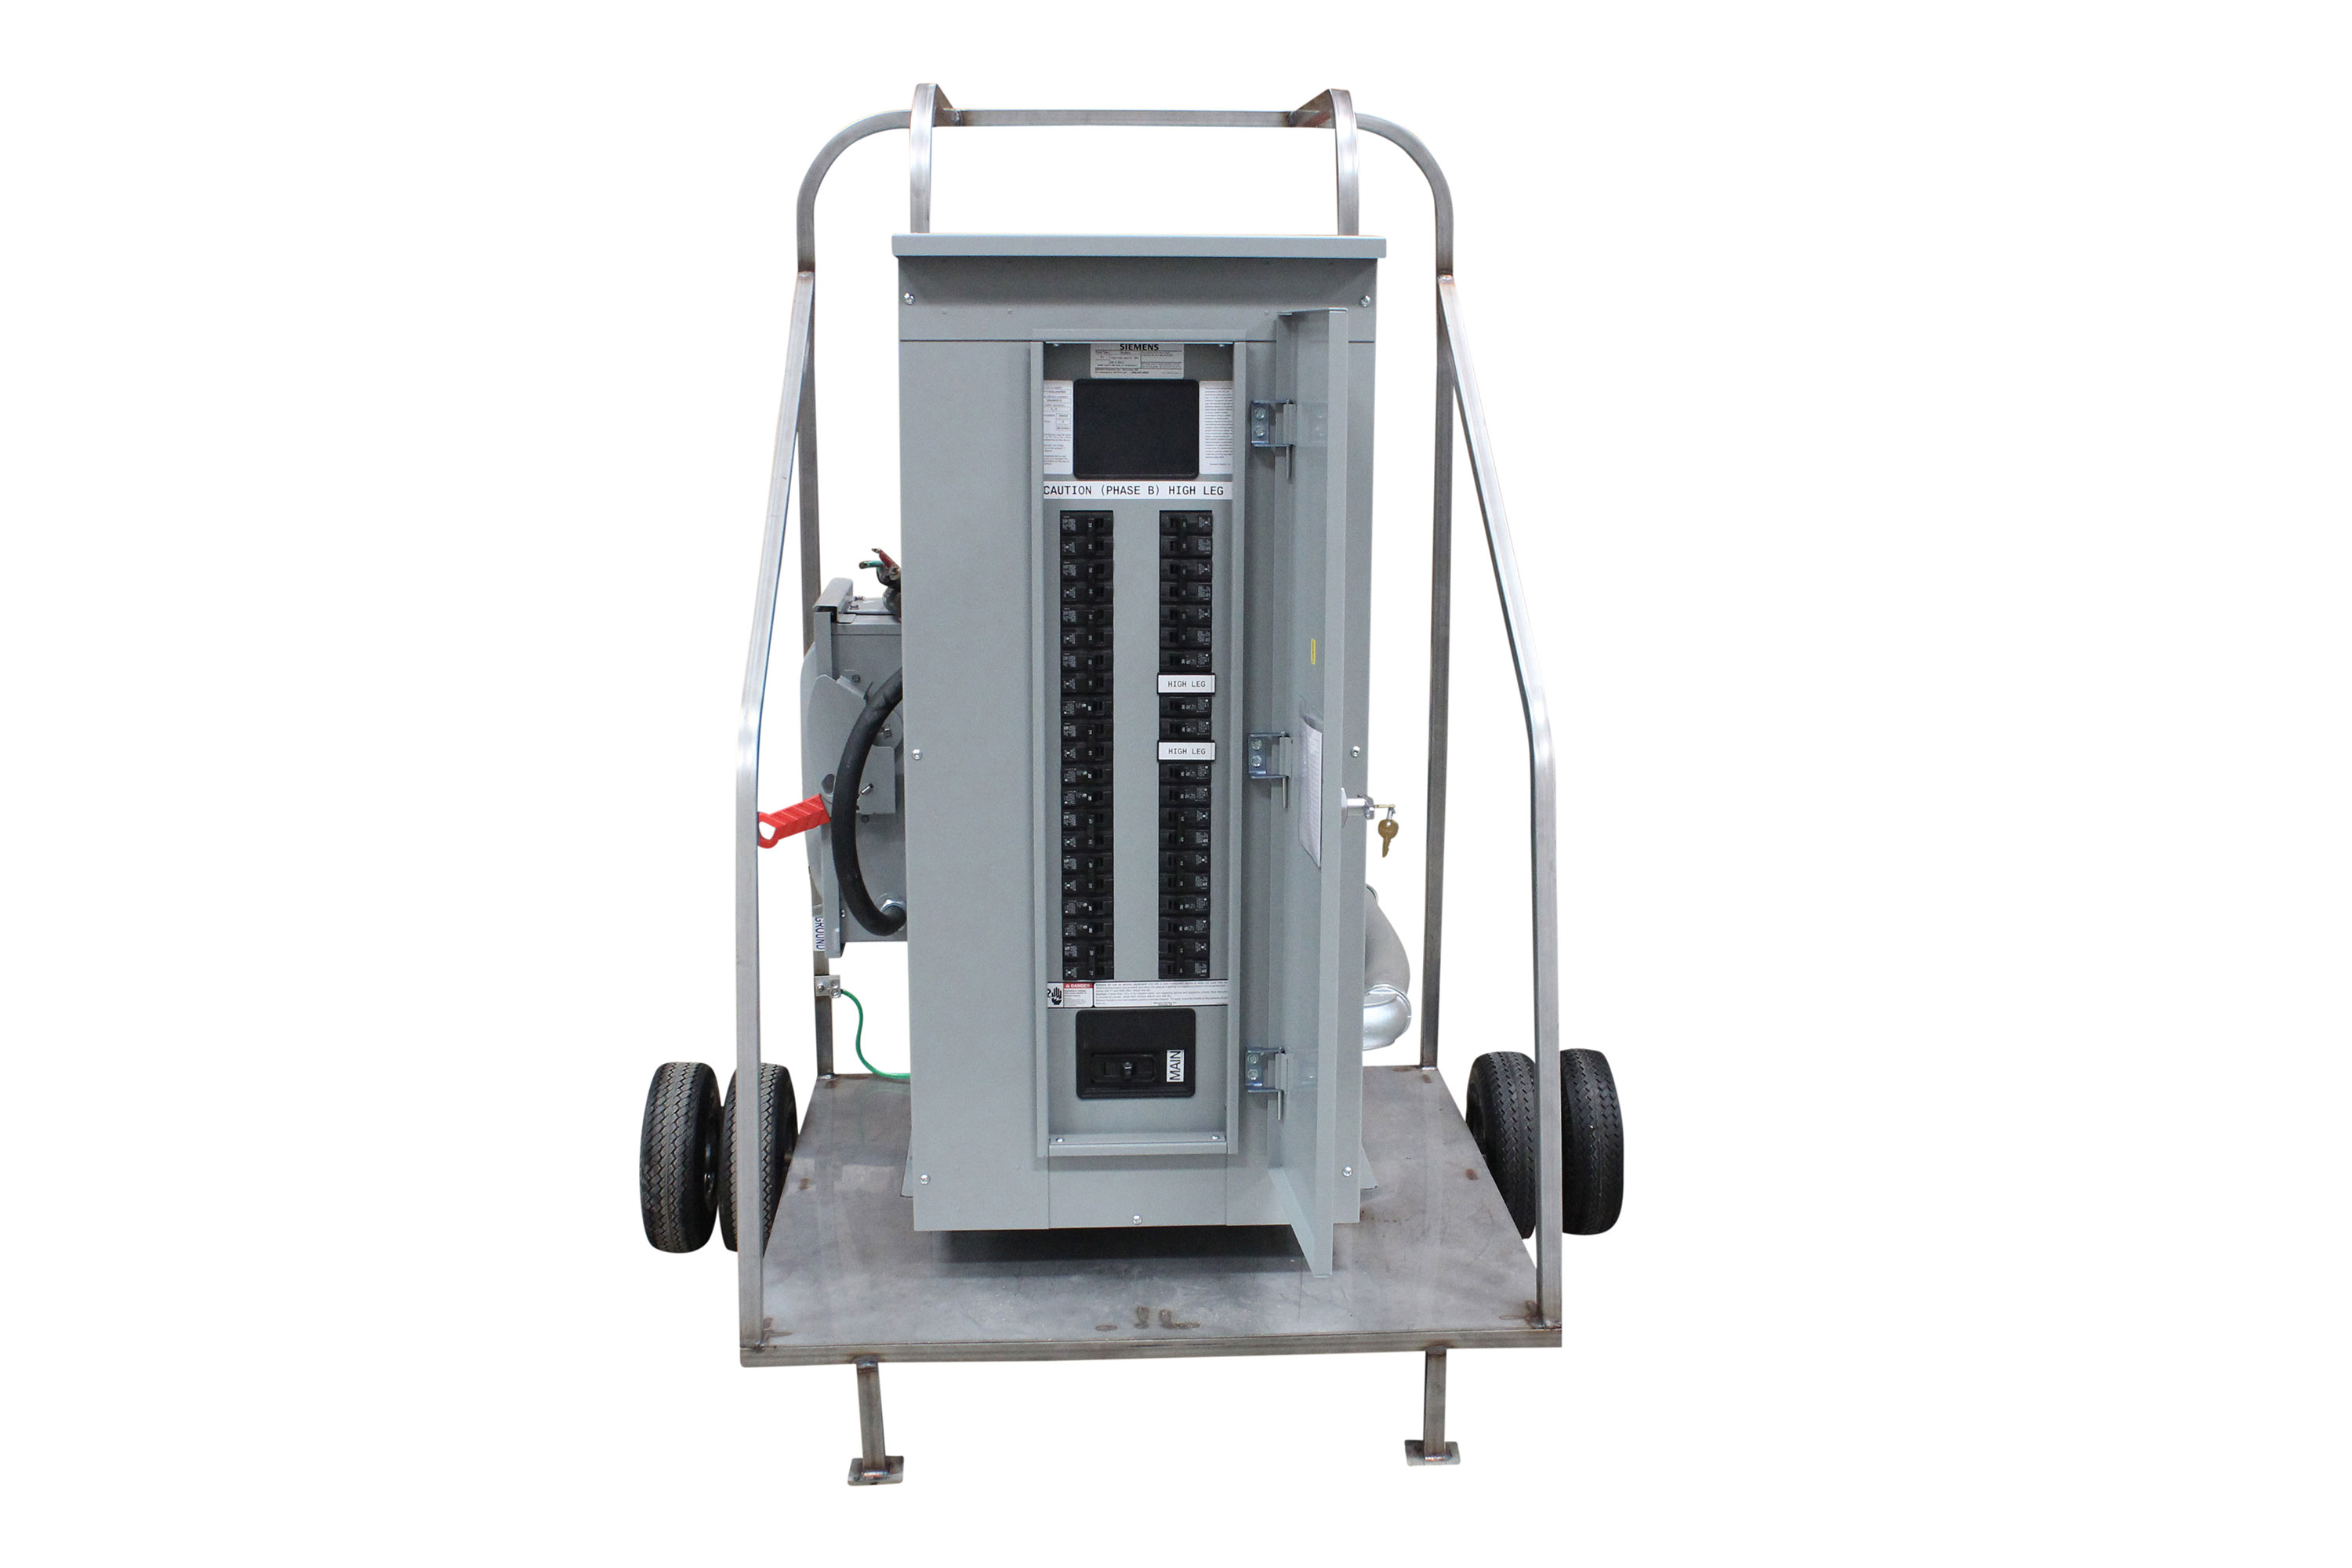 Power Distribution Cart that features 14 Double Pole Breakers and 28 Single Pole Breakers